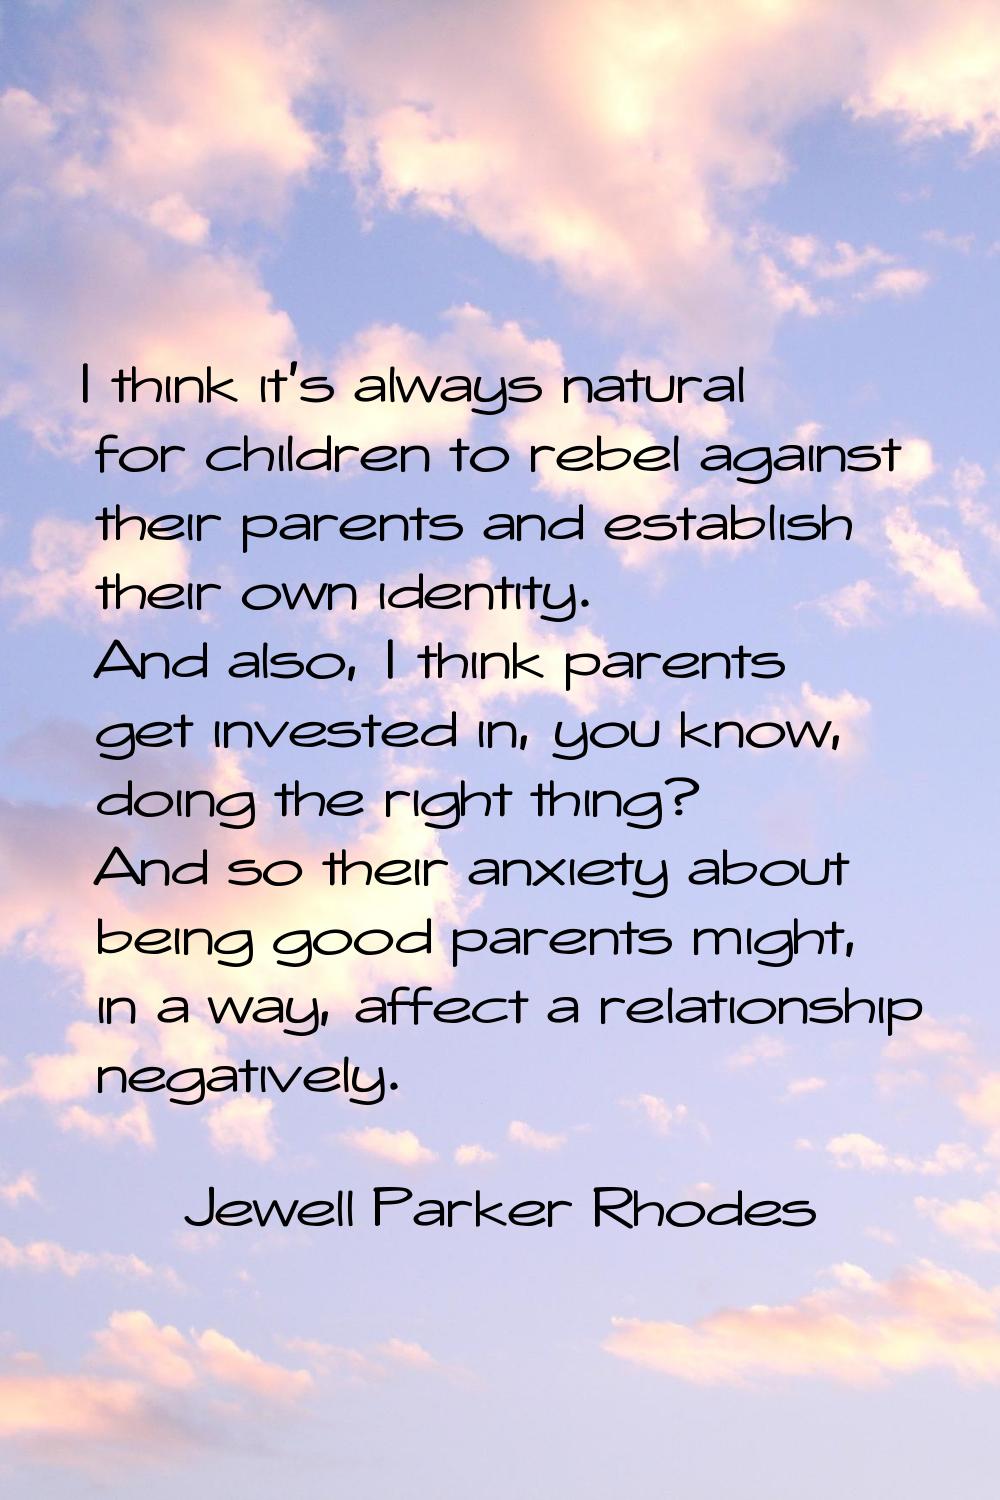 I think it's always natural for children to rebel against their parents and establish their own ide